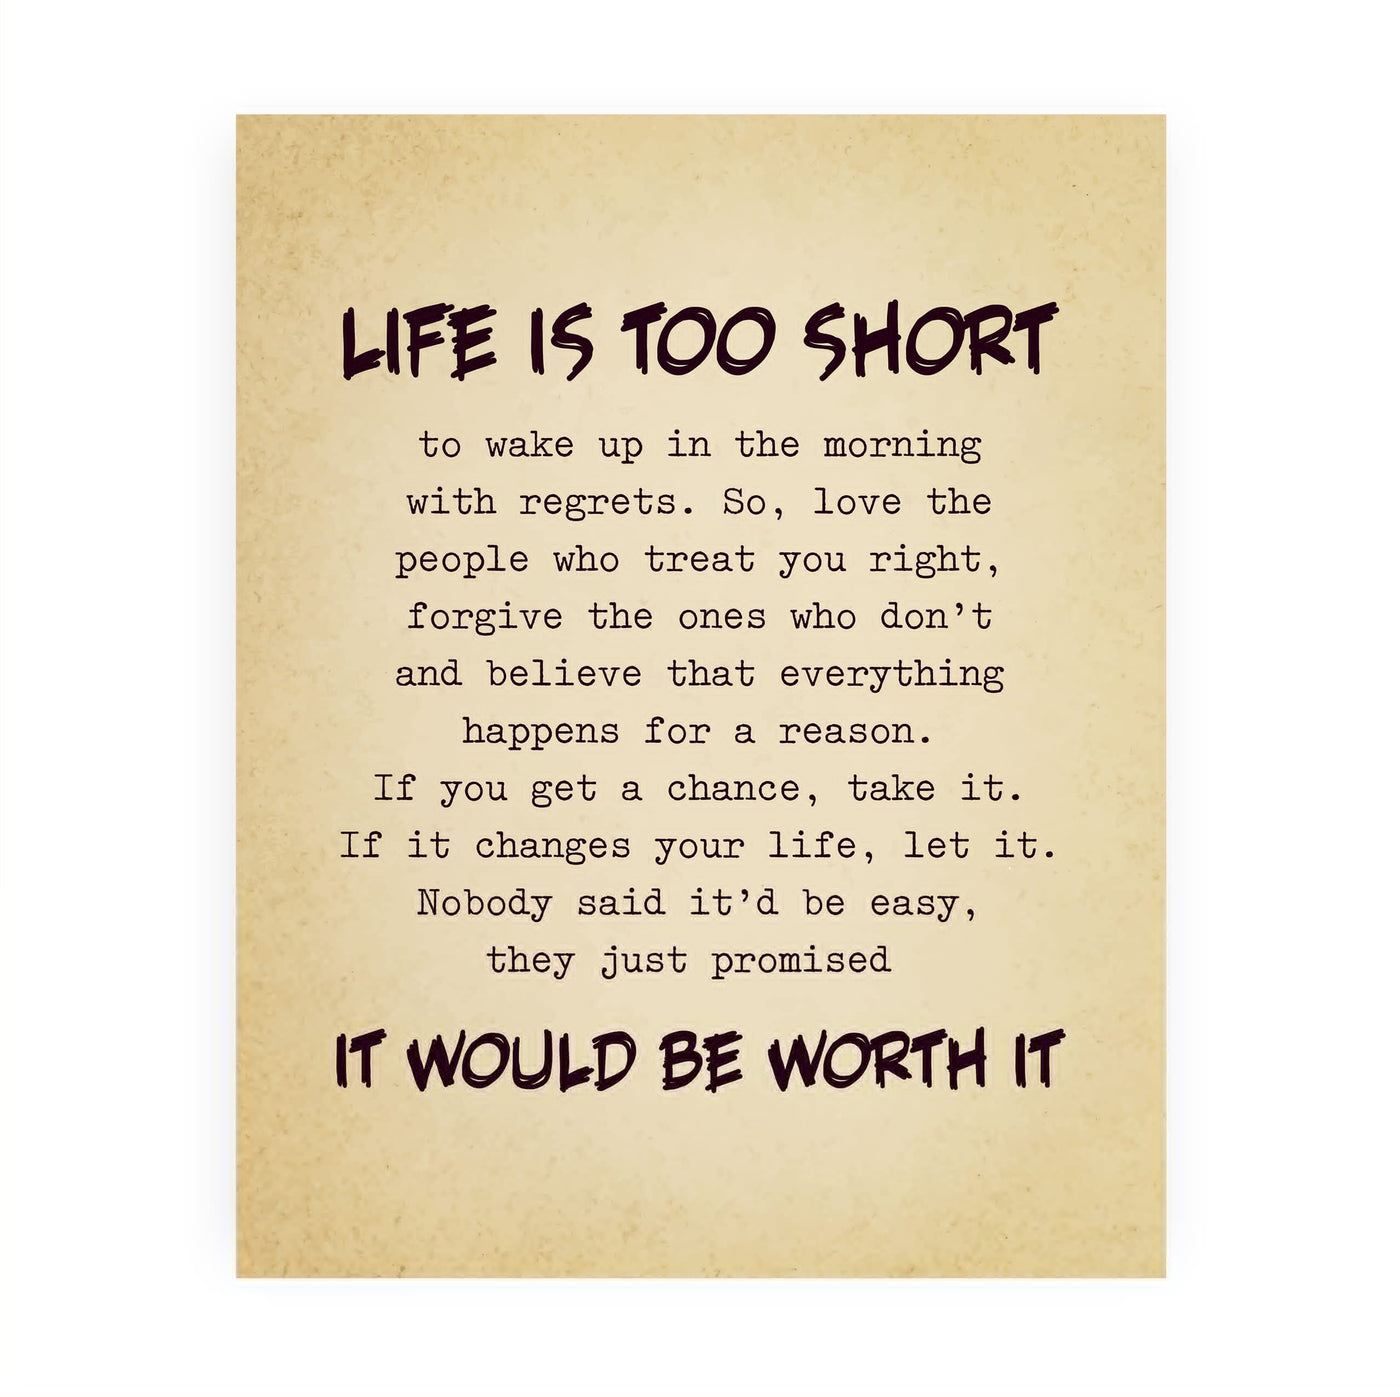 Life Is Too Short, Worth It Inspirational Quotes Wall Art Sign -8 x 10" Motivational Picture Print -Ready to Frame. Positive Decoration for Home-Office-Classroom Decor. Great Gift for Inspiration!